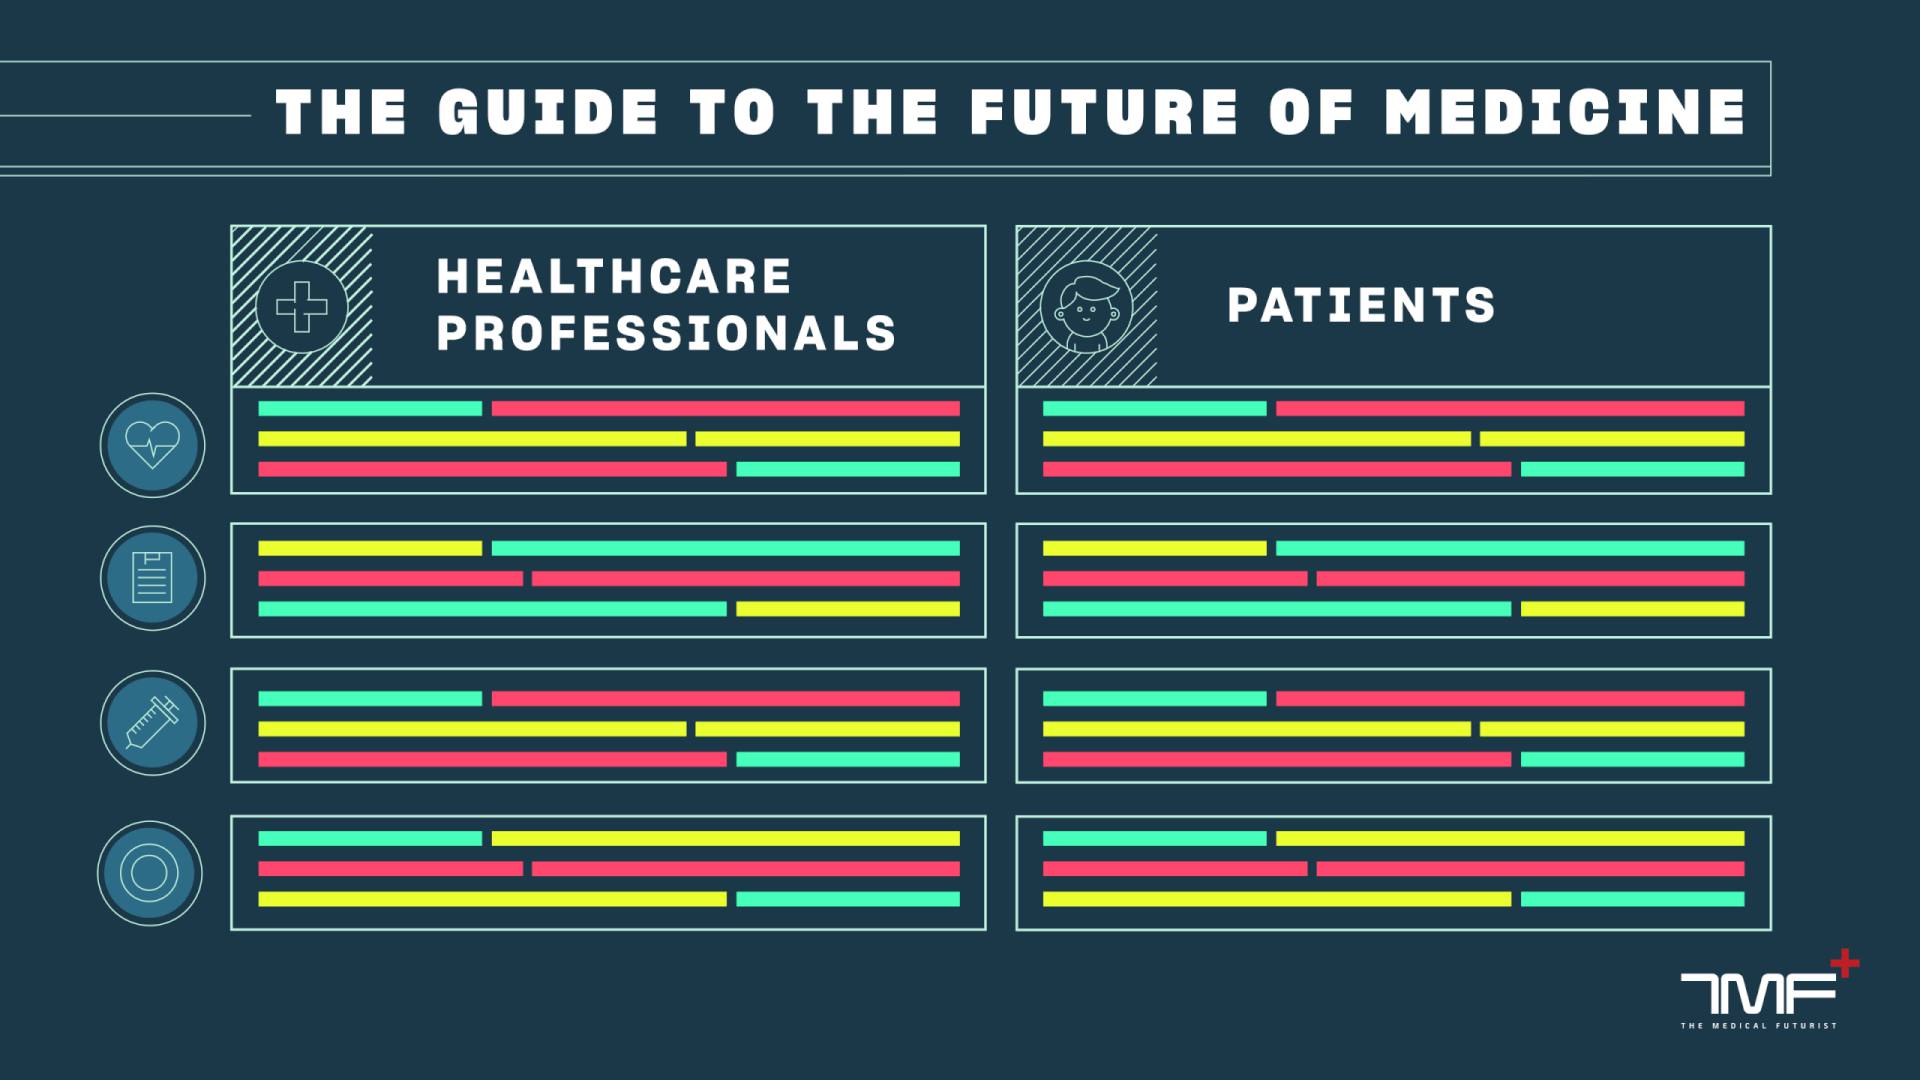 Top 40 Digital Health Trends In One Complex Infographic